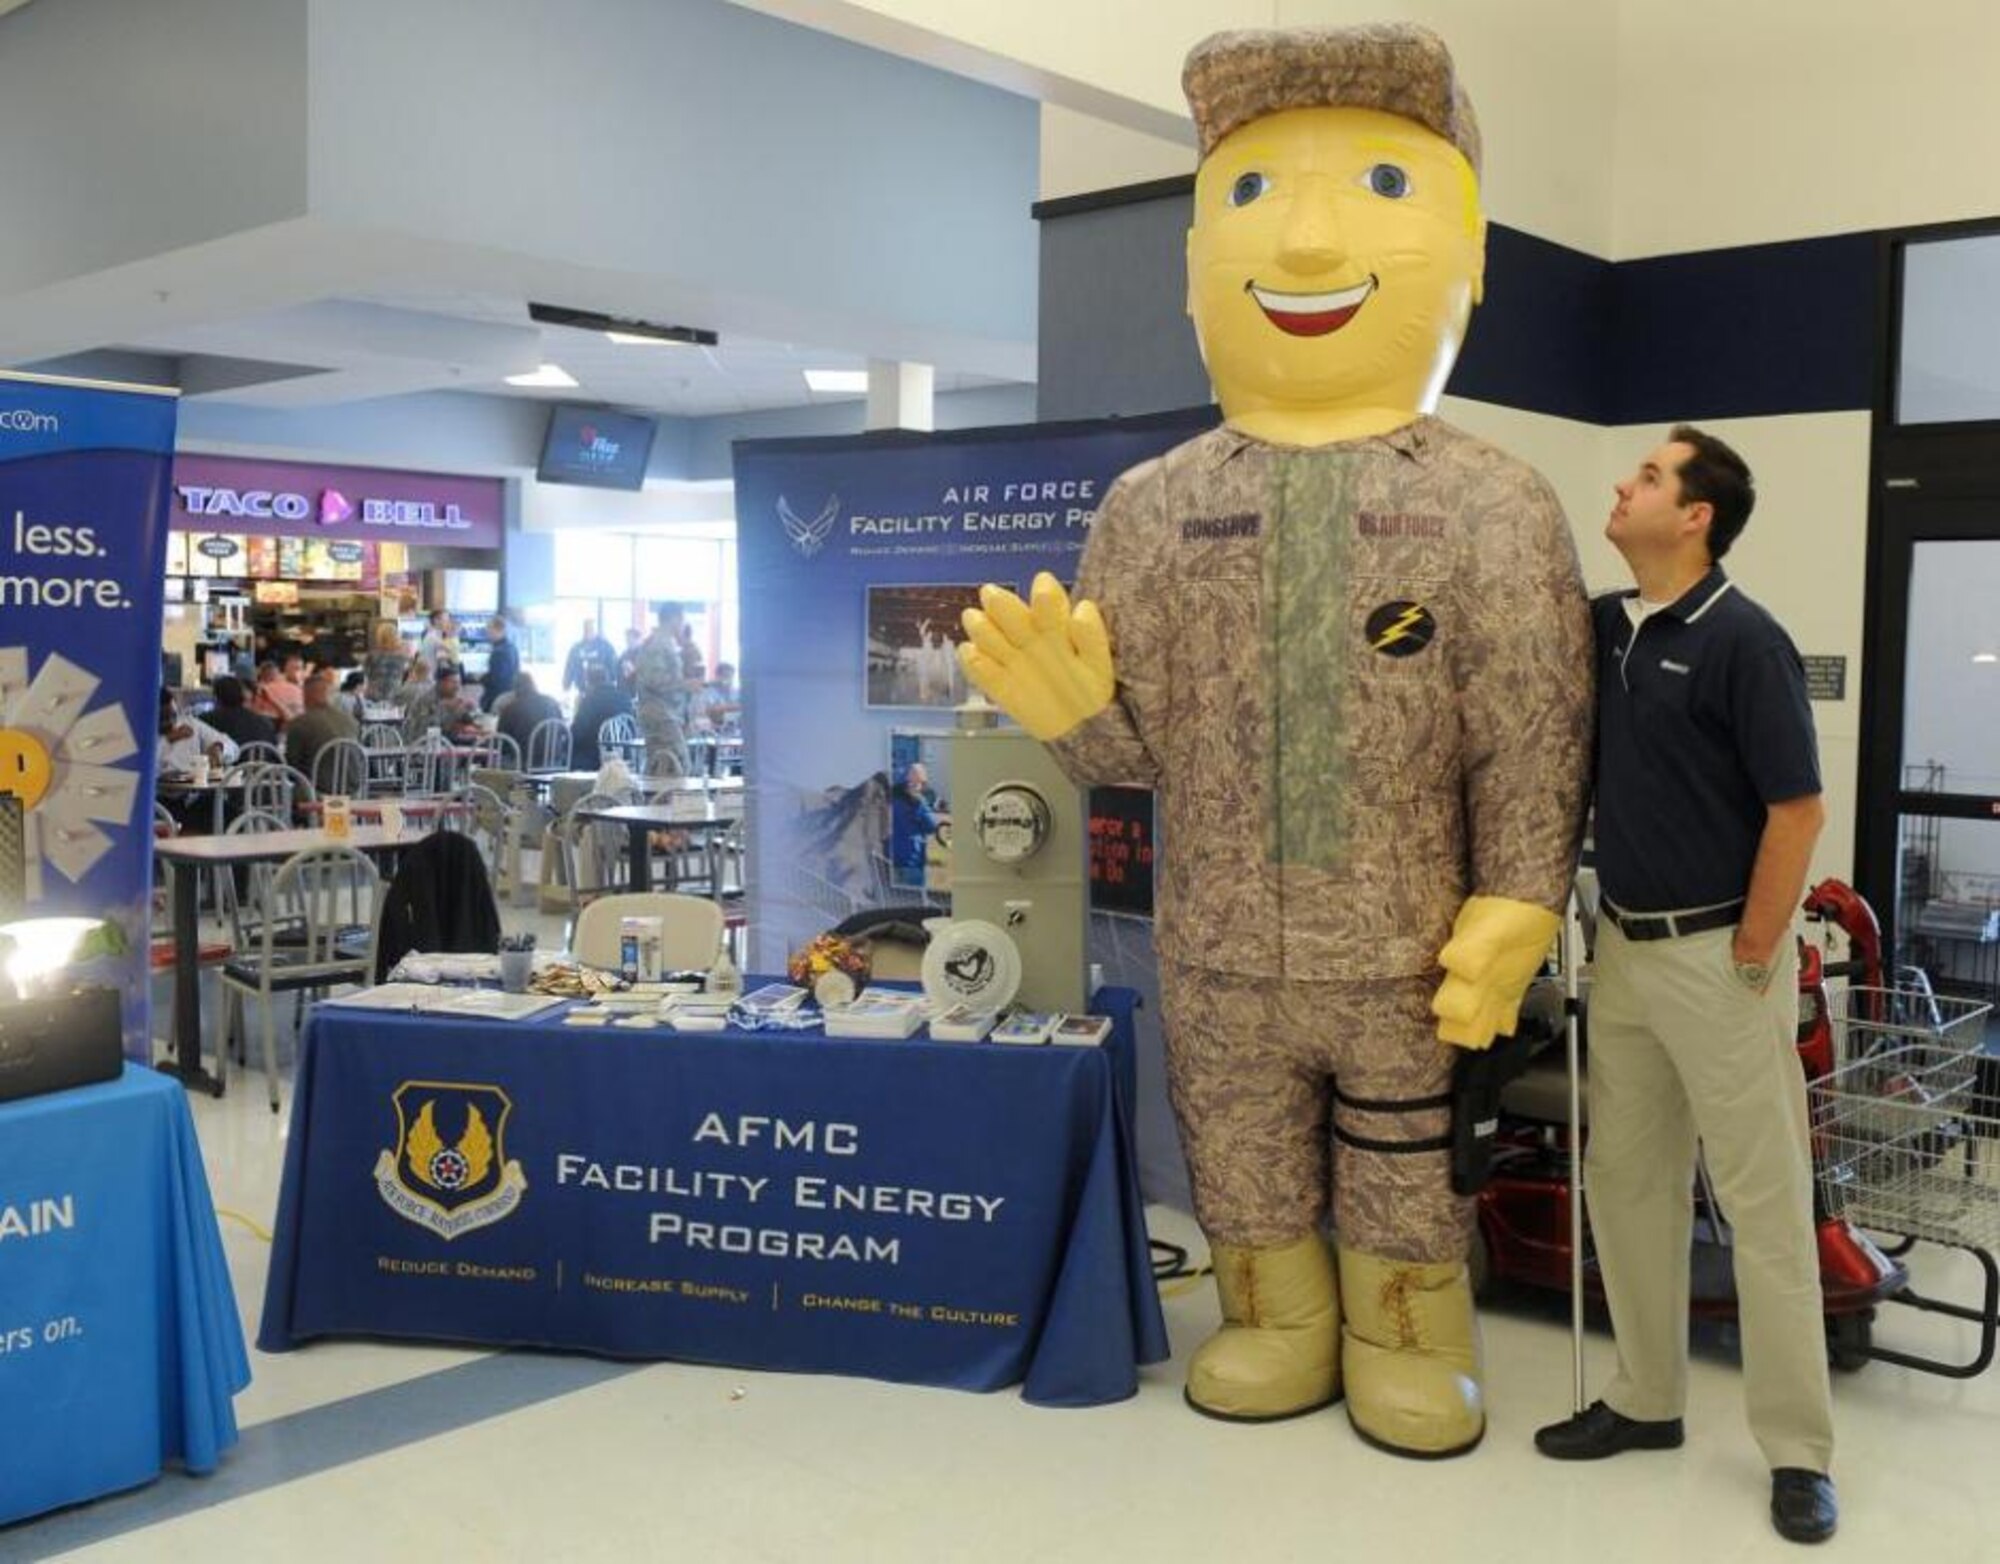 Daryn Tufts, who is "Therm" from Questar, looks up to another energy conservation mascot Col. Conserve (Senior Airman Travis Patt, 649th Munitions Squadron) at the Energy Fair held Oct. 9 at the Base Exchange Food Court. Both mascots stand tall. Therm is 6 foot 6 inches and Col. Conserve is close to 8 feet tall. (U.S. Air Force photo by Alex R. Lloyd/Released)